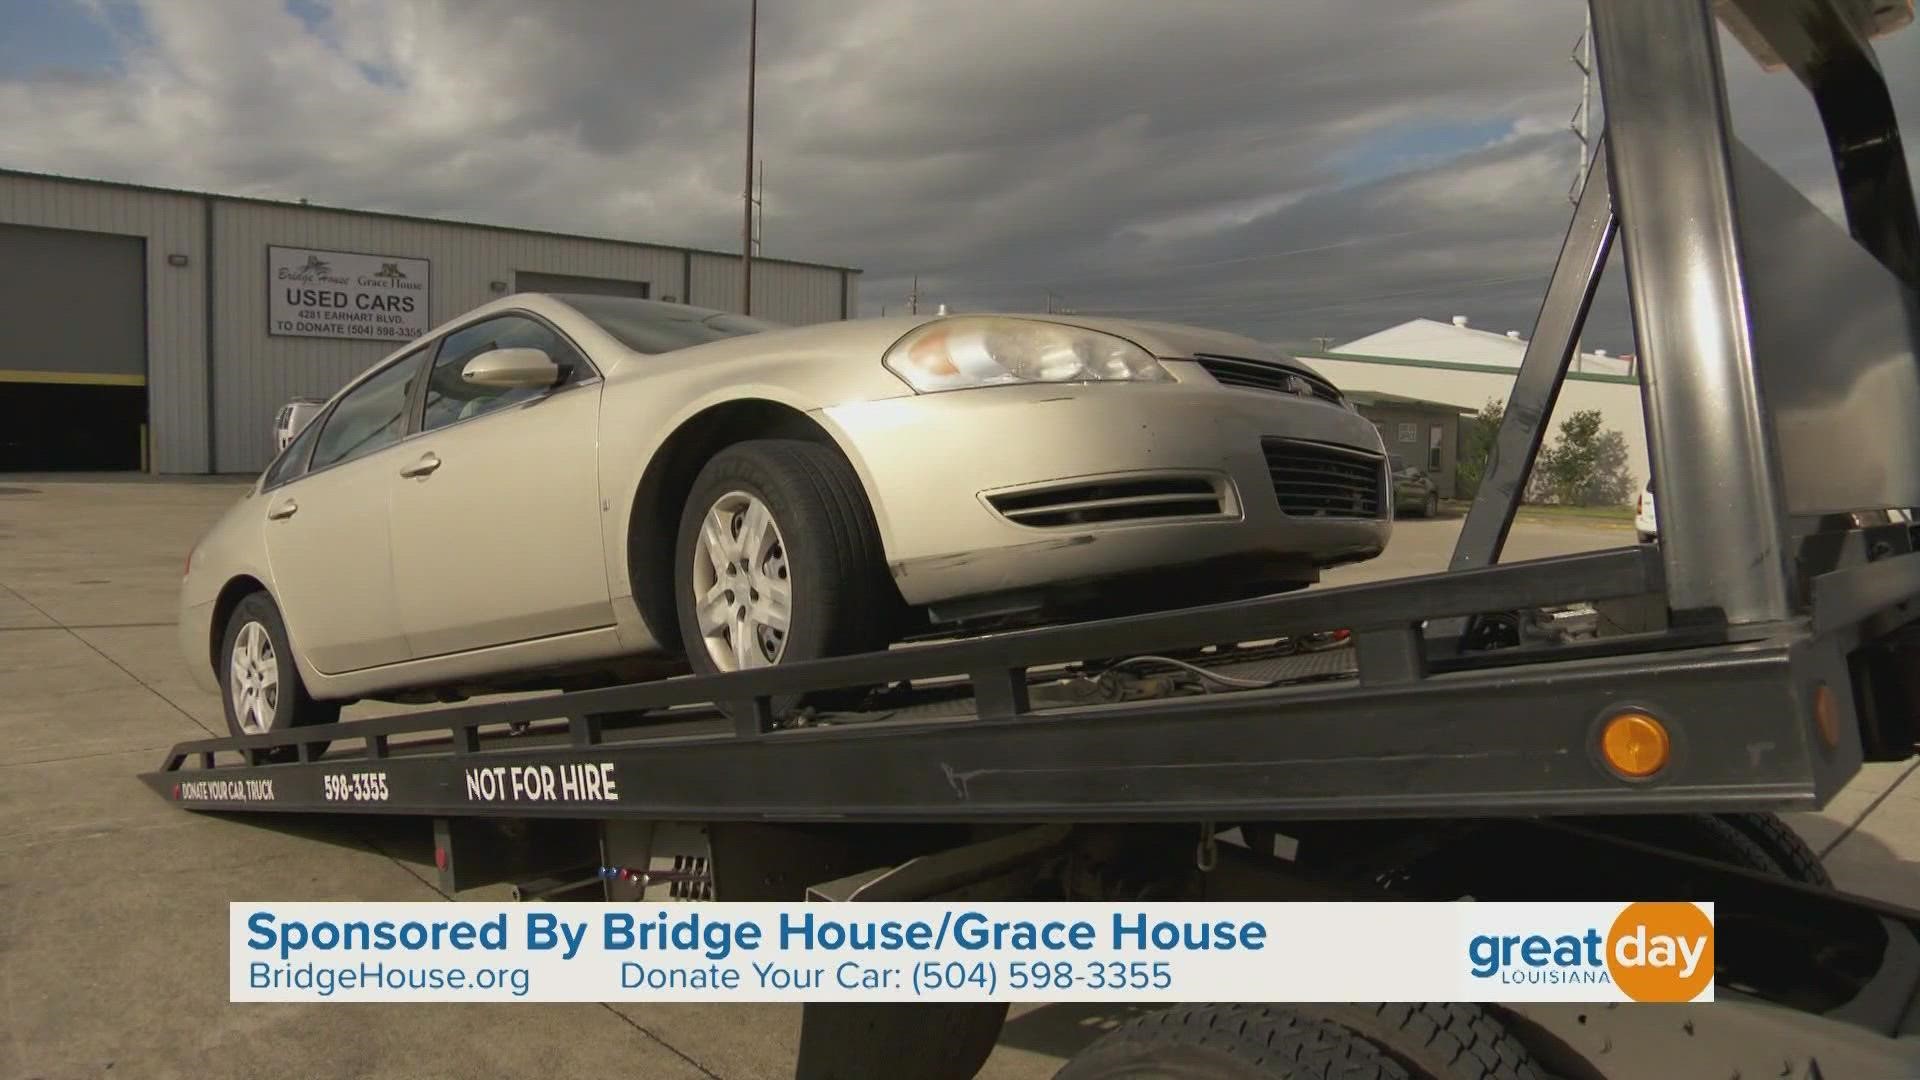 Bridge House/Grace House offers long-term treatment to those struggling with addiction in the Greater New Orleans Area. This is funded in part by their used car lot.